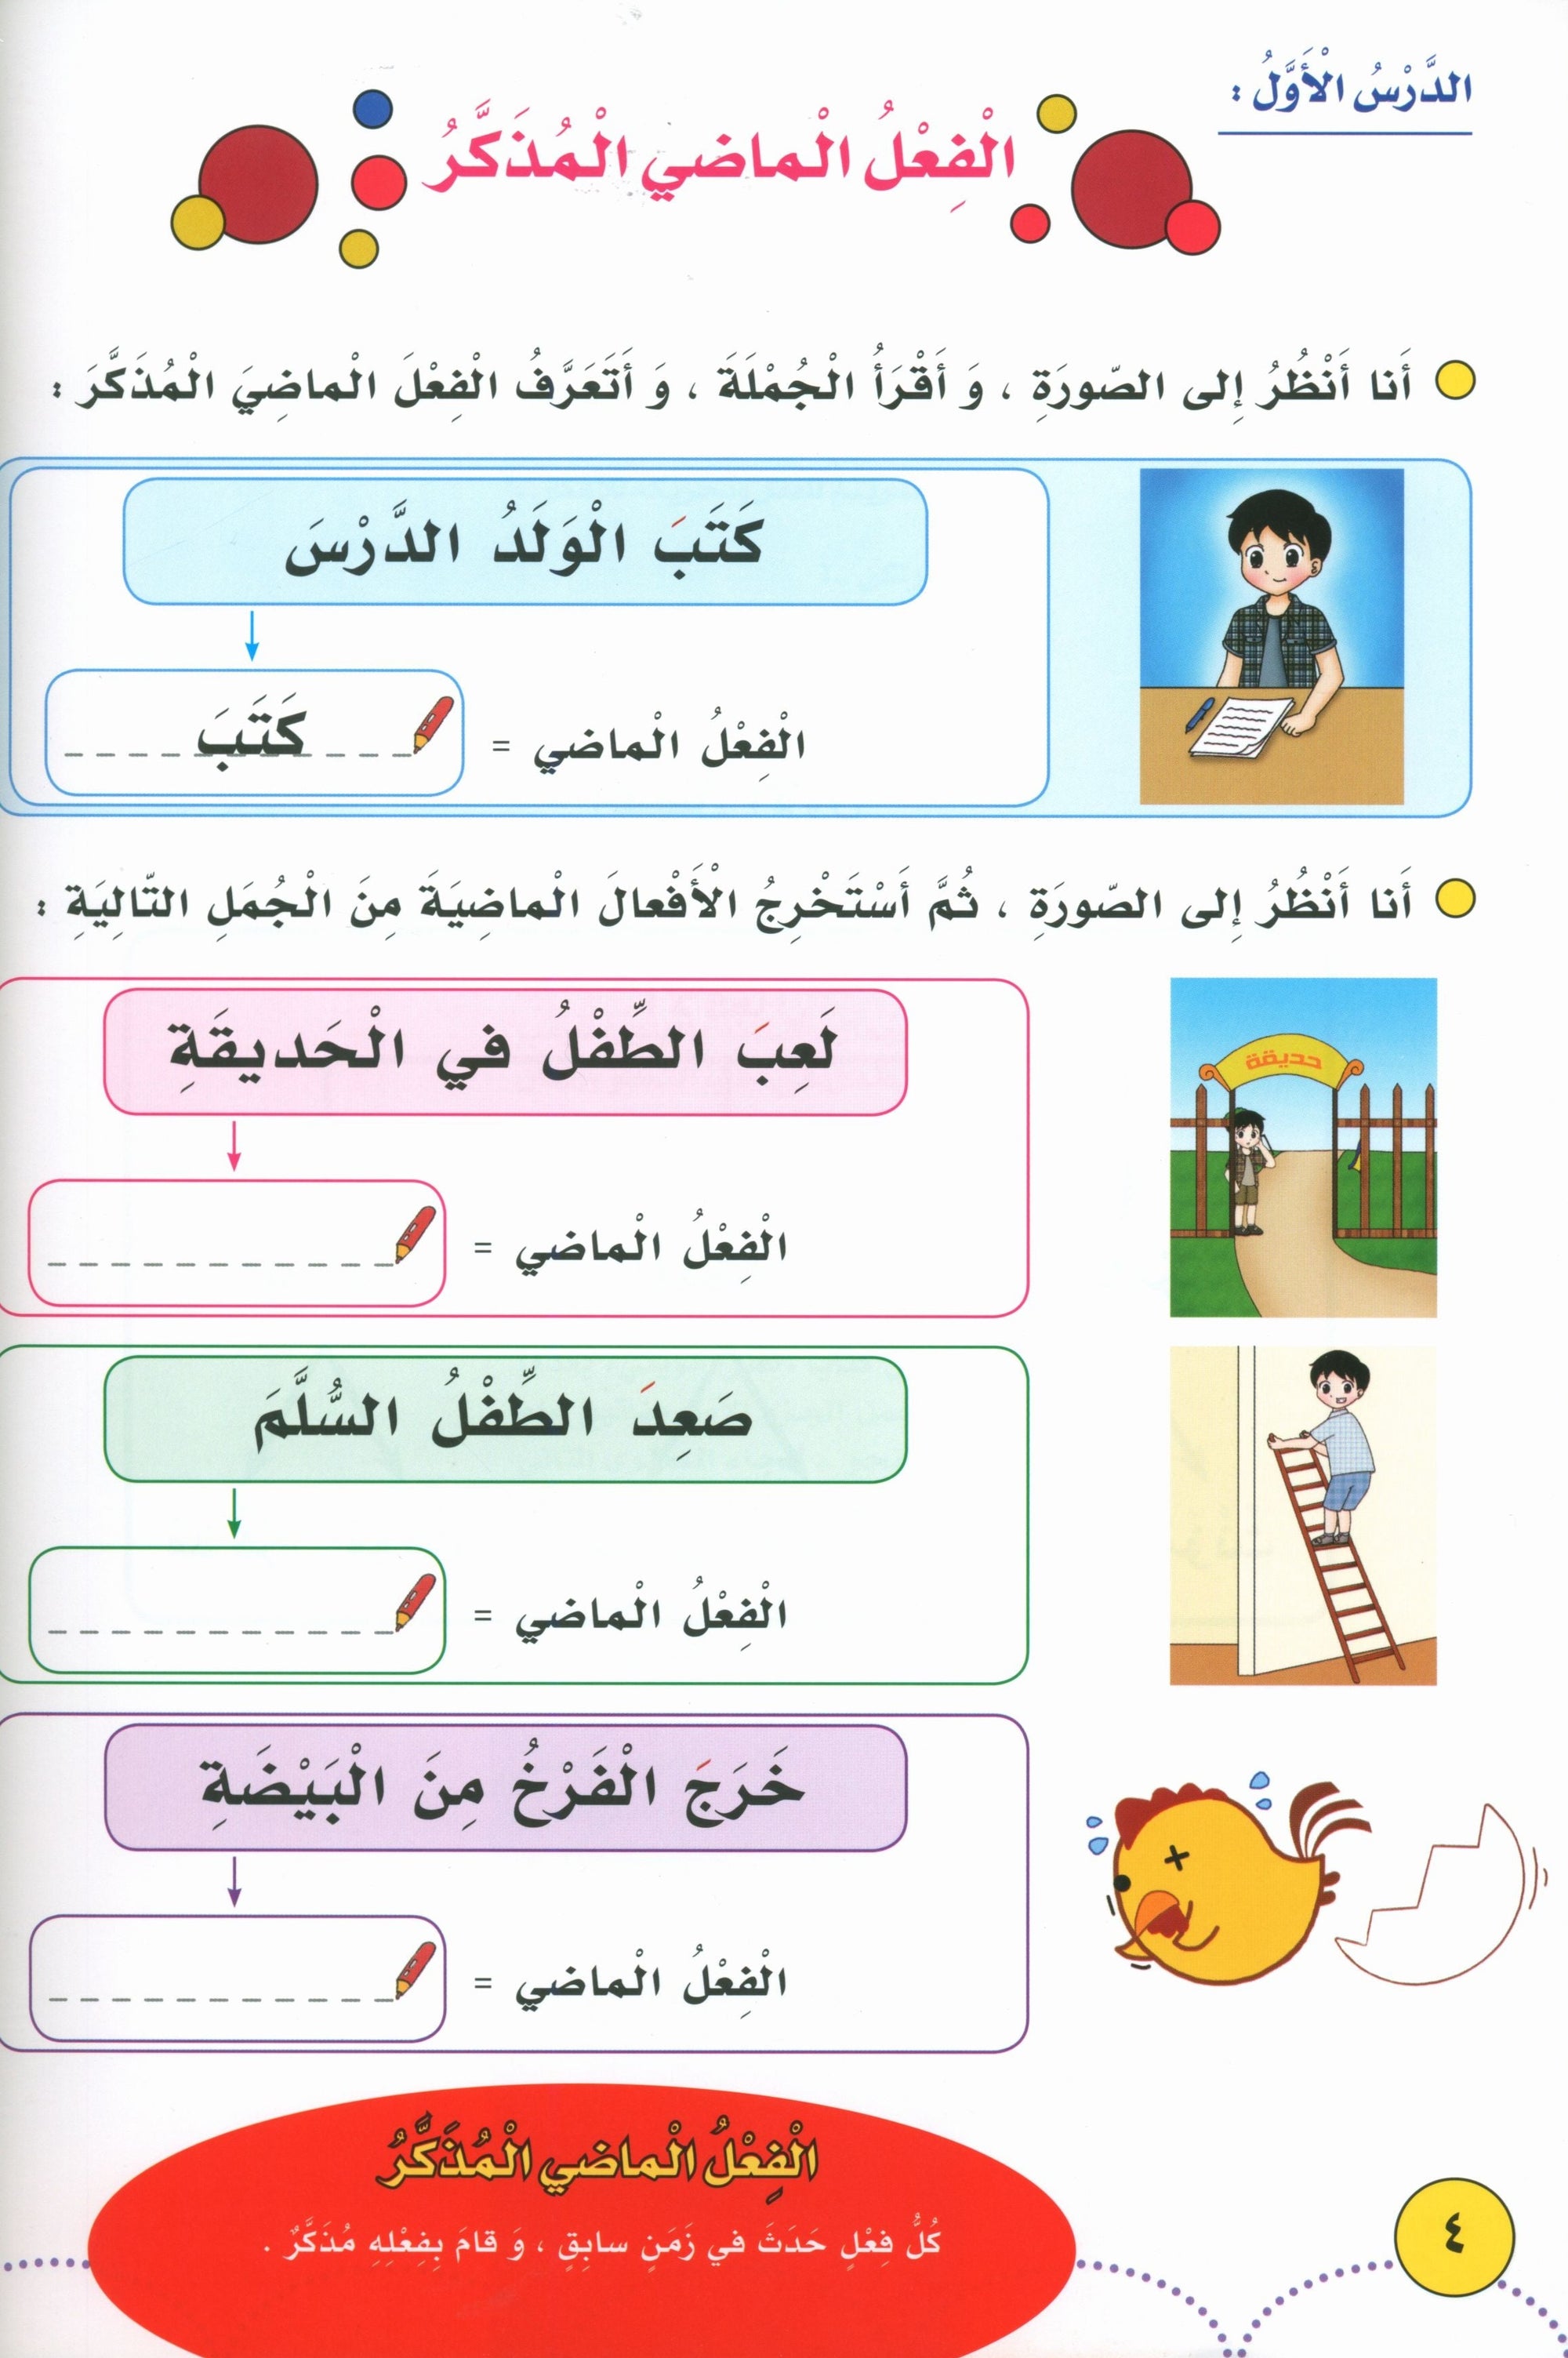 My Language Is My Identity Part 2 لغتي هويتي